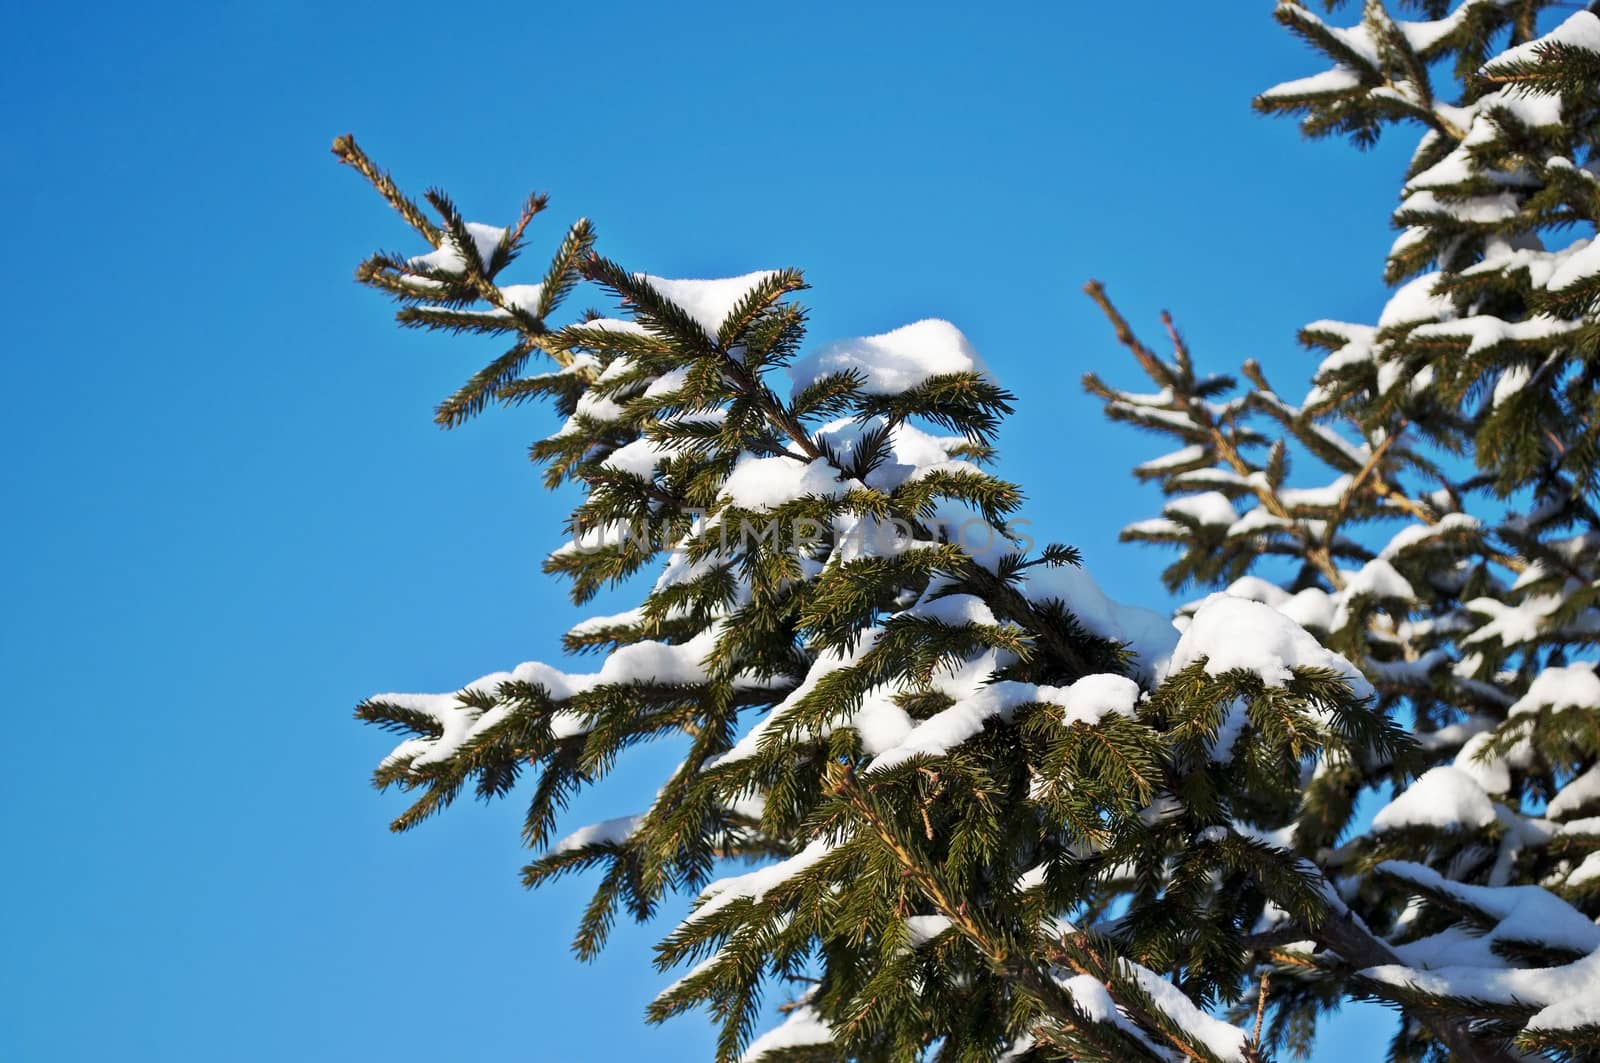 Snow-covered fir branches by wander